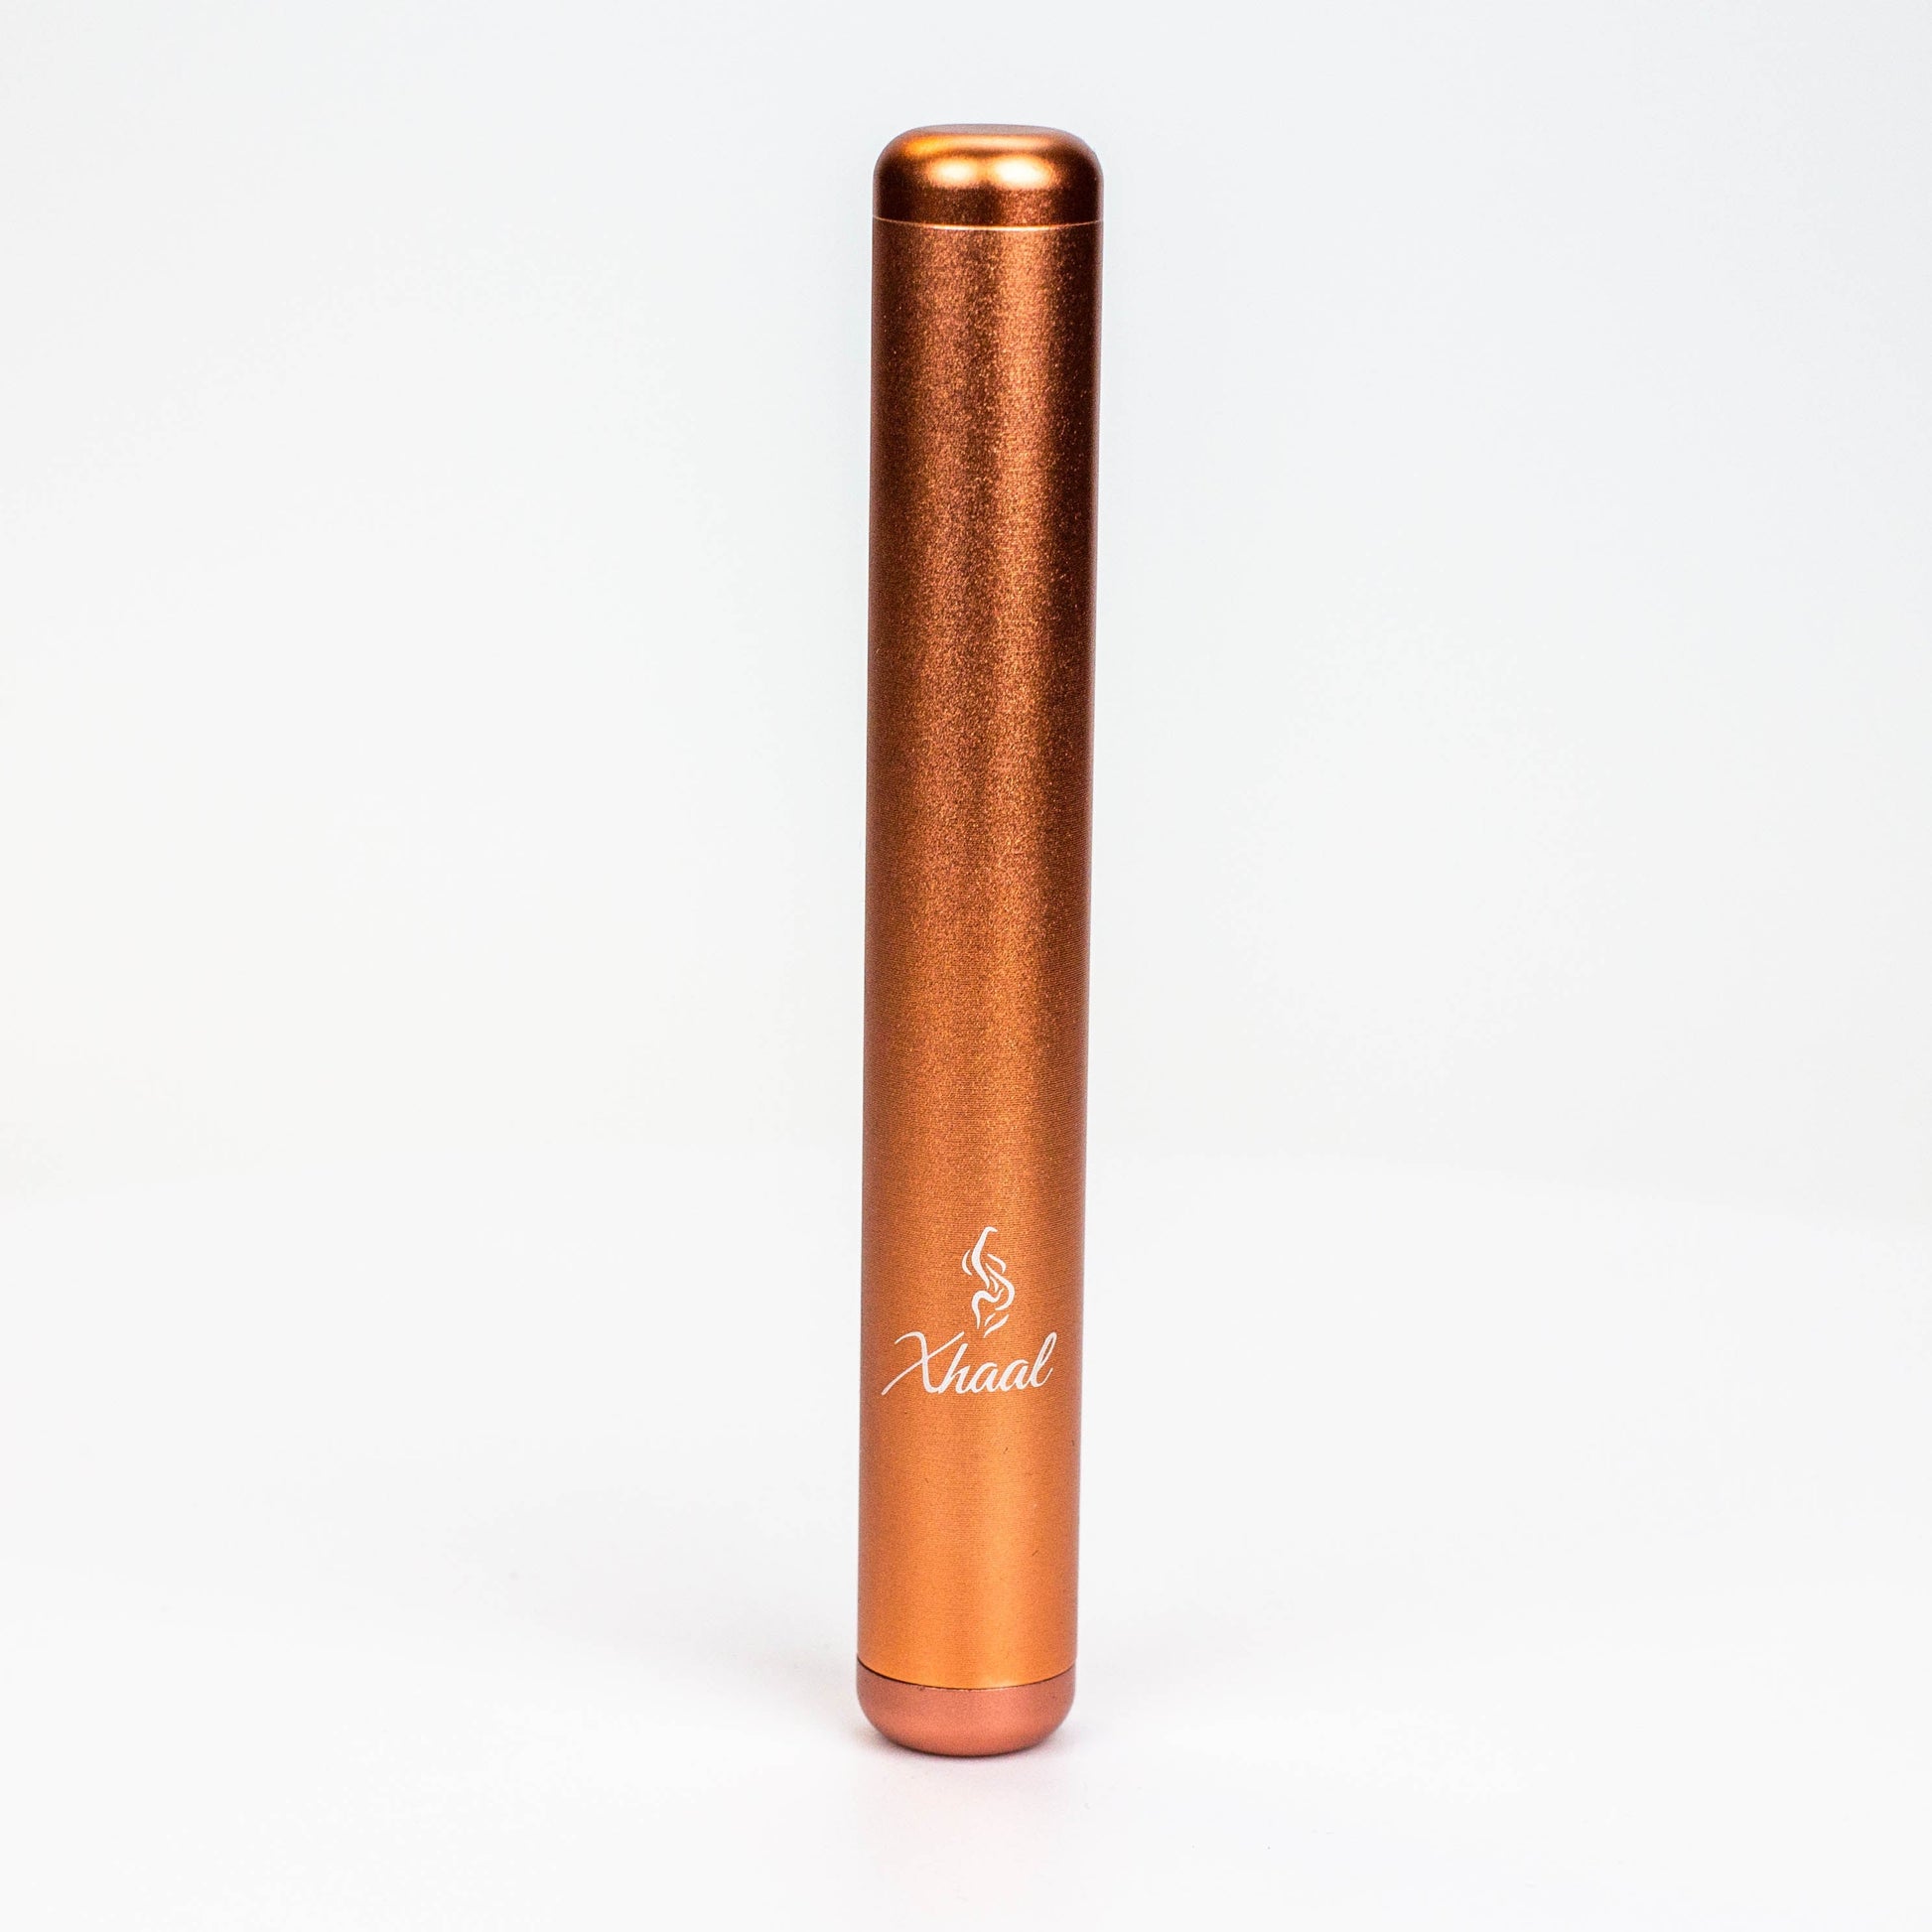 Xhaal Pre-Roll Joint single Cases_8